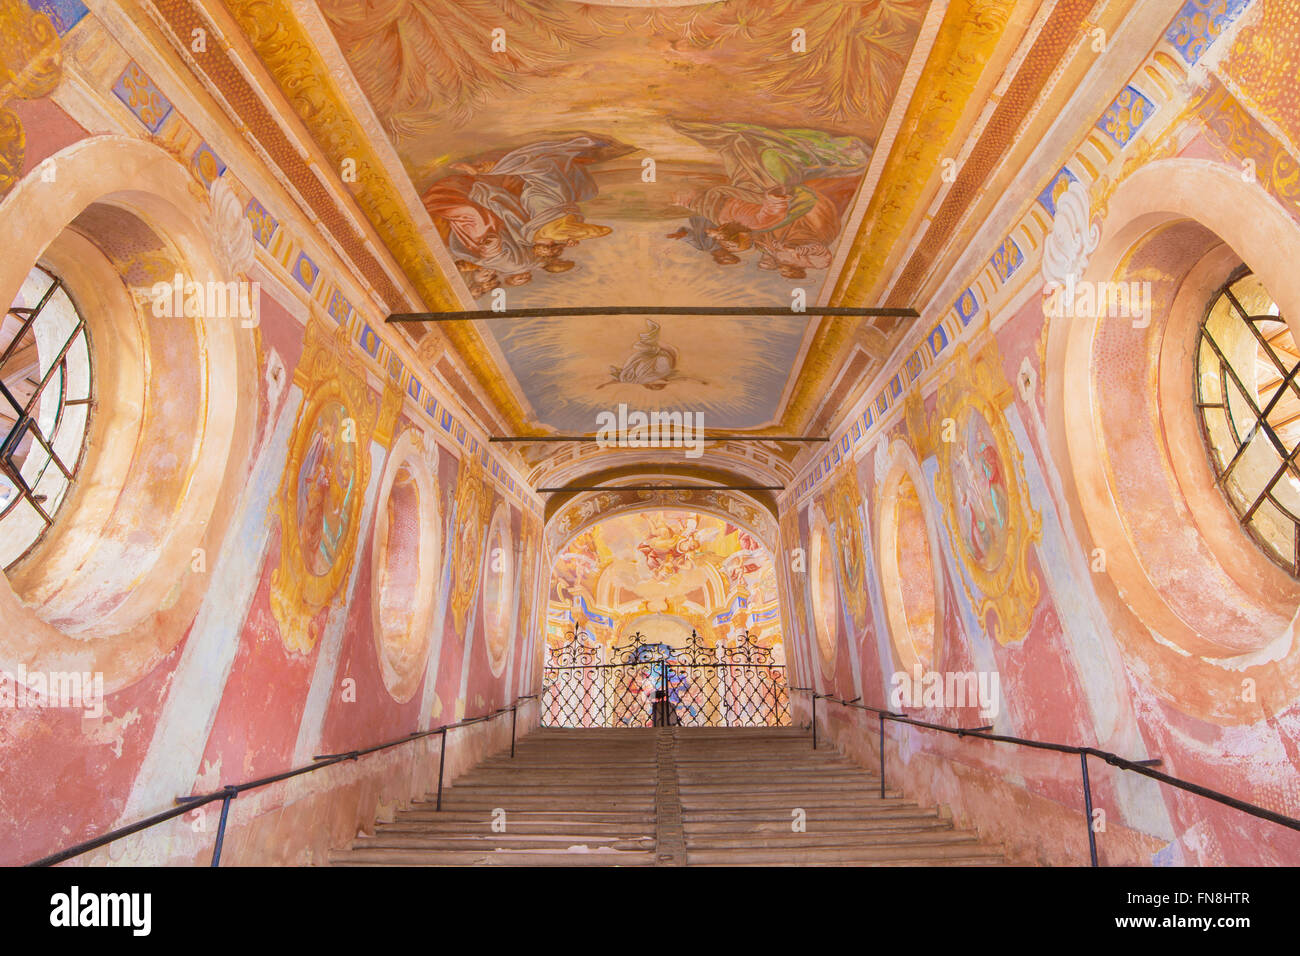 BANSKA STIAVNICA, SLOVAKIA - FEBRUARY 20, 2015: The fresco of Ascension of the Lord on  'Holy Stairs' Stock Photo